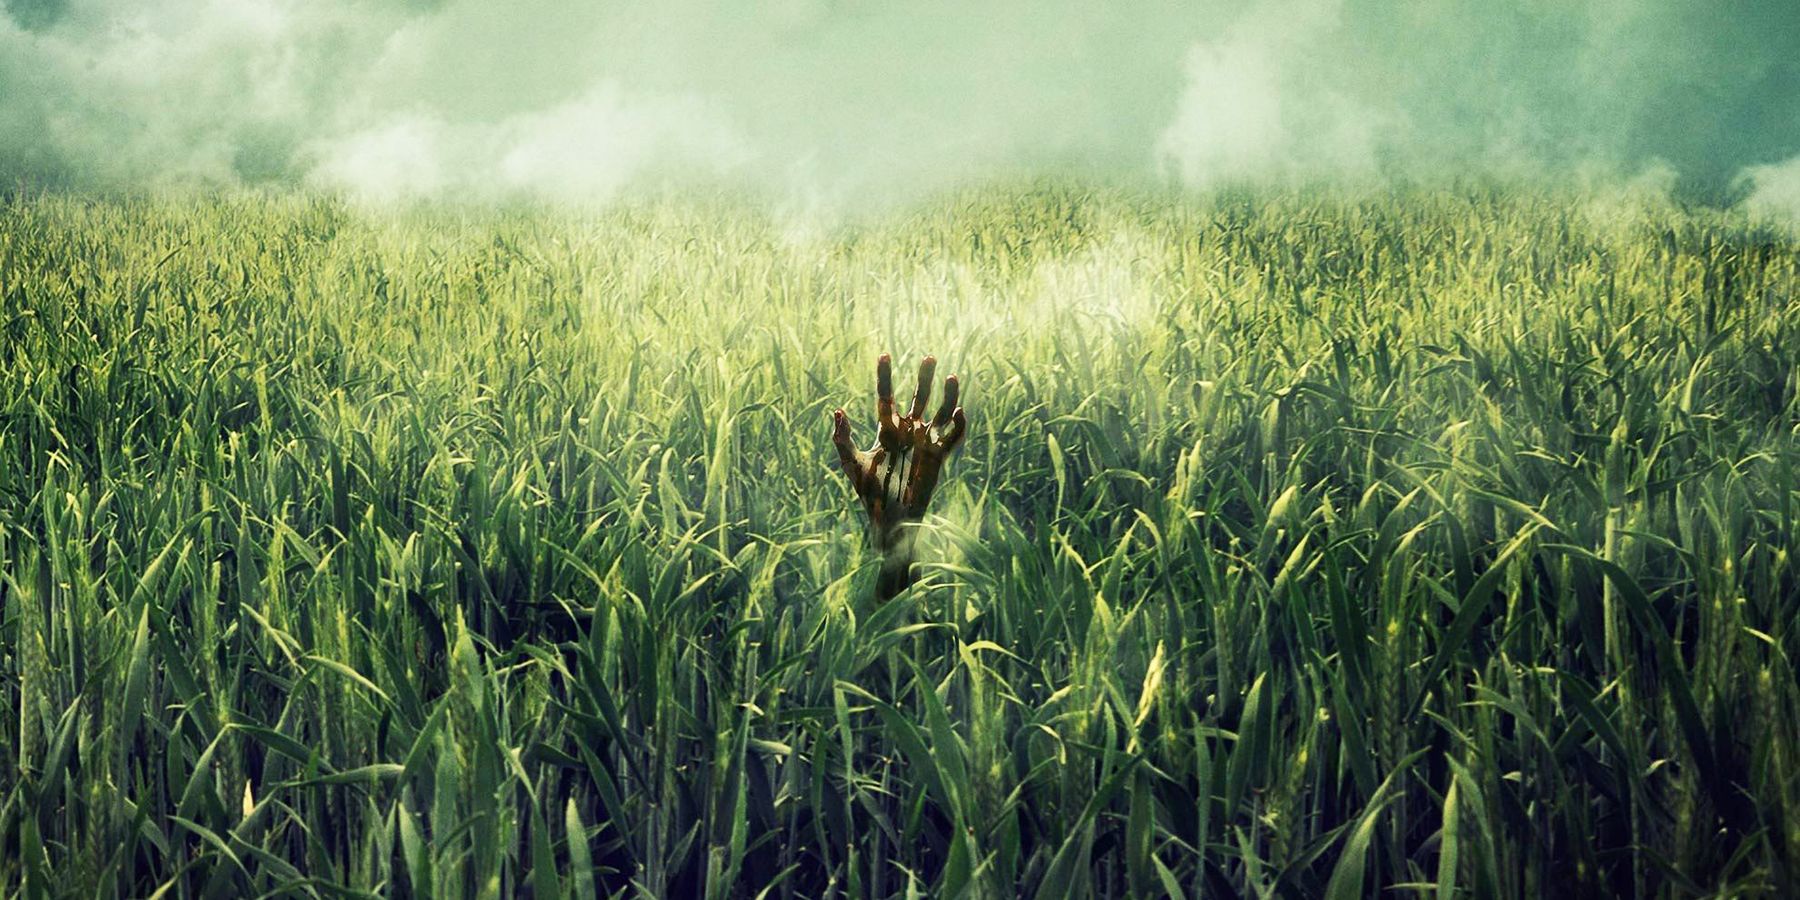 A hand rises in the In The Tall Grass poster.